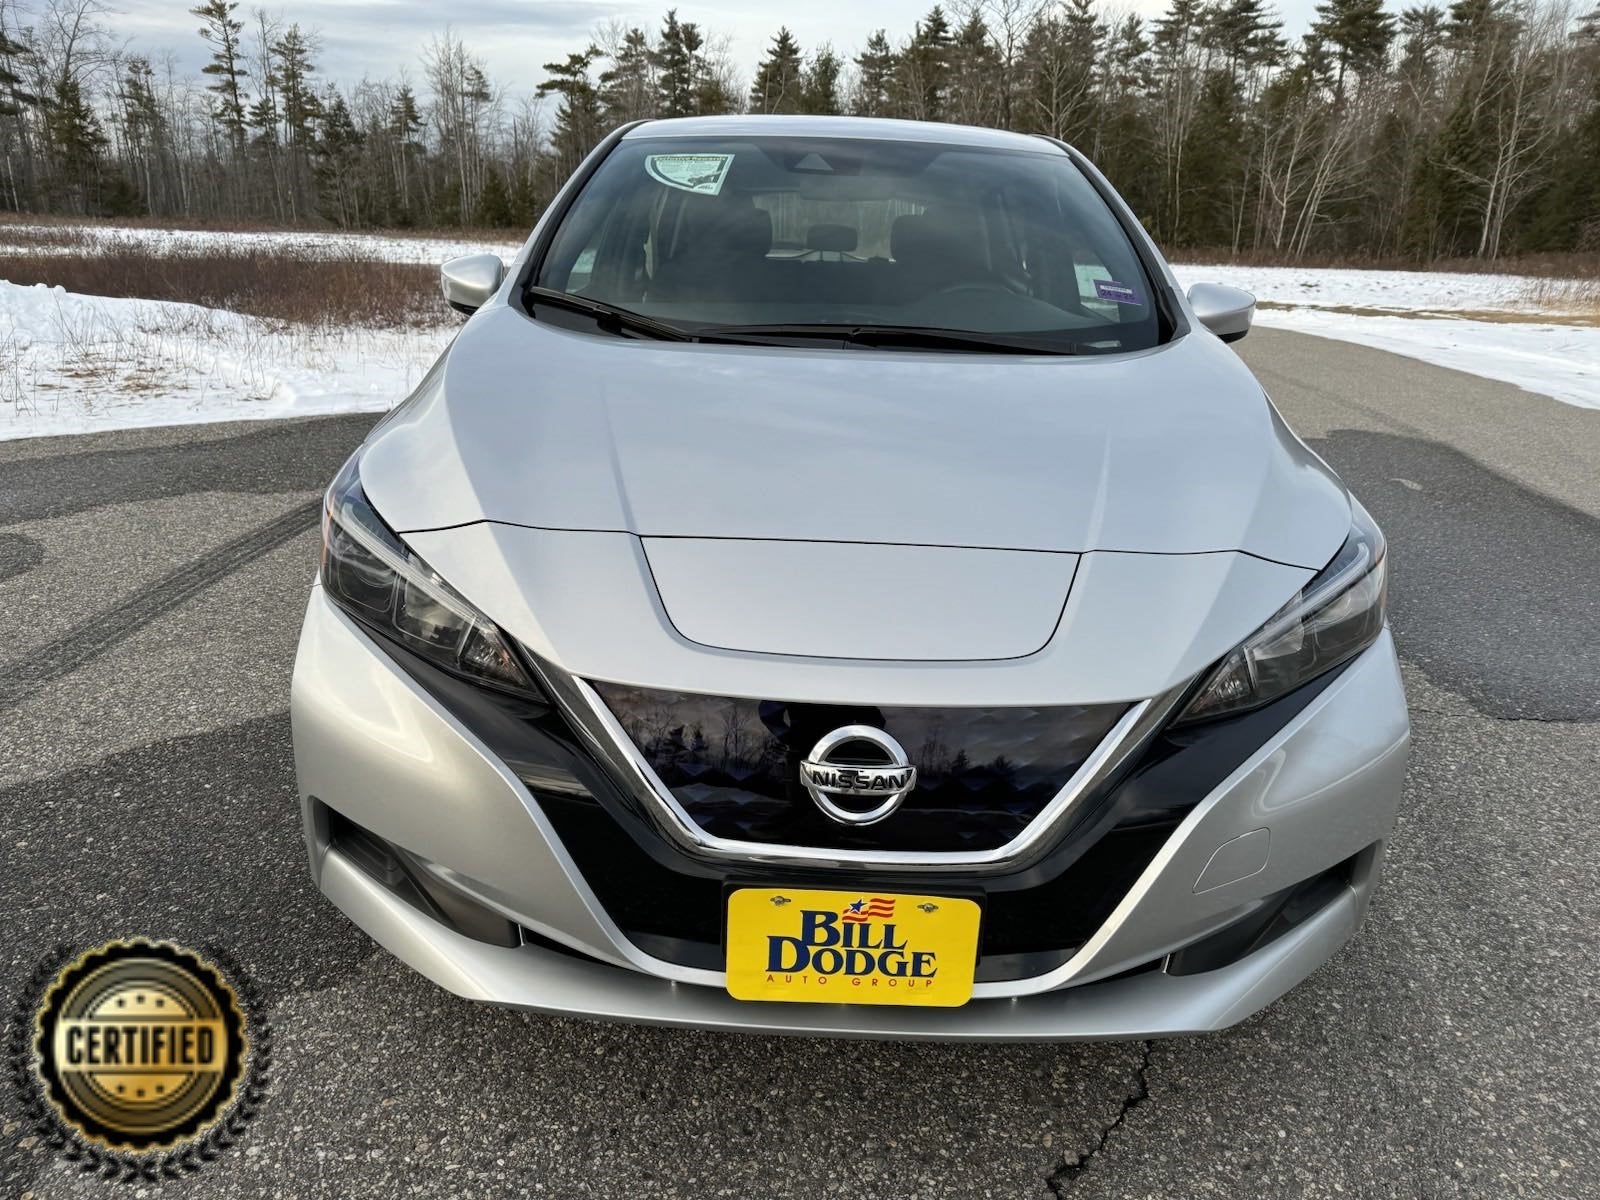 Certified 2022 Nissan LEAF S with VIN 1N4AZ1BV3NC560504 for sale in Saco, ME